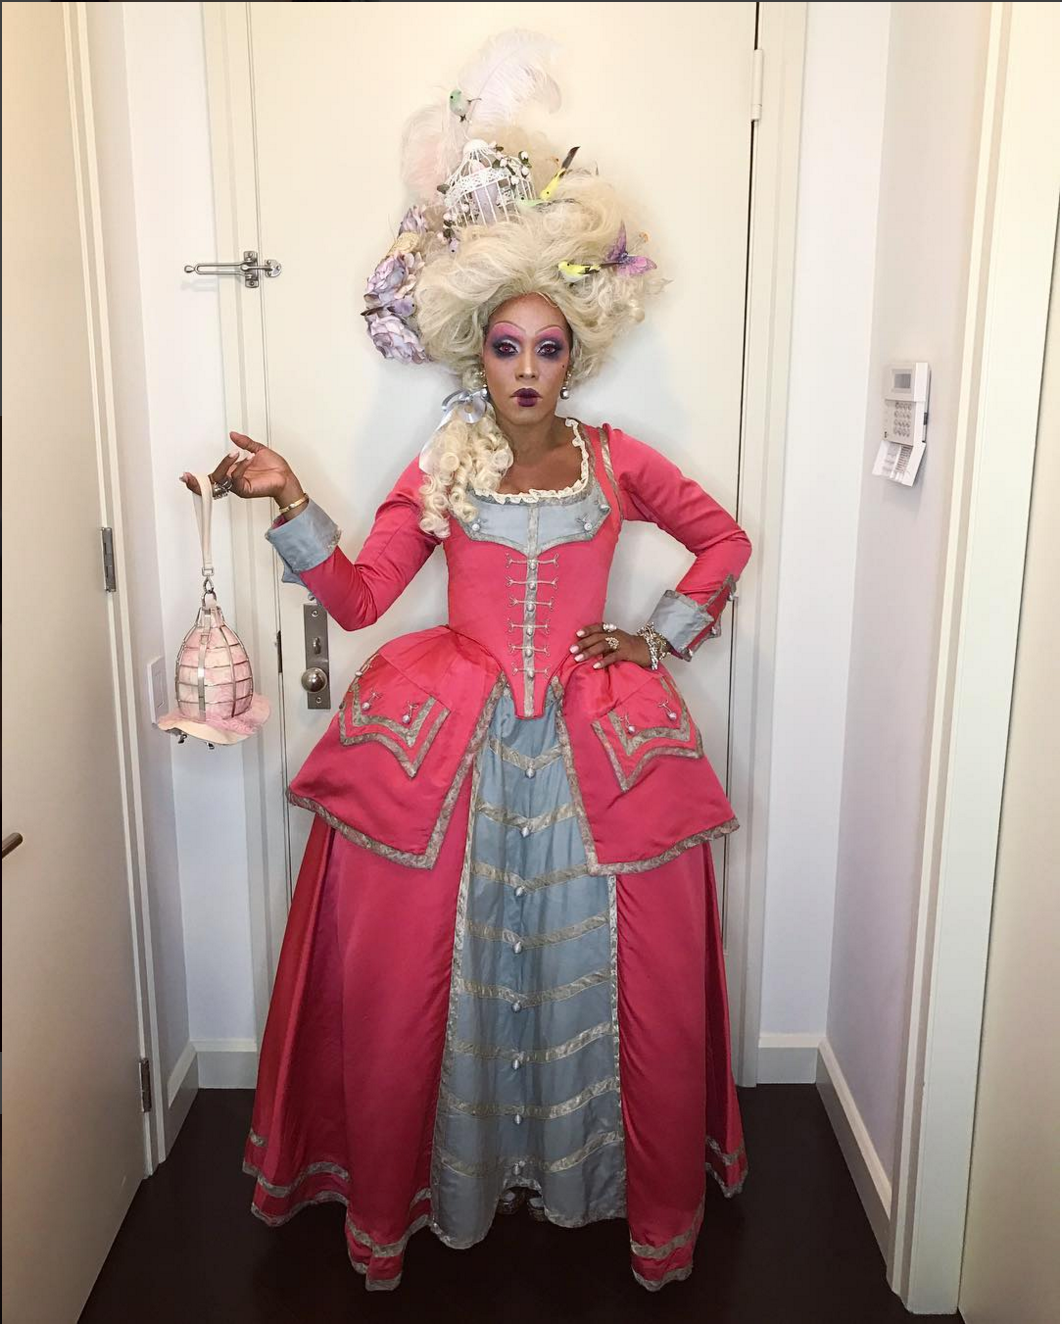 Trick or Treat: What Our Favorite Celebs Wore for Halloween
